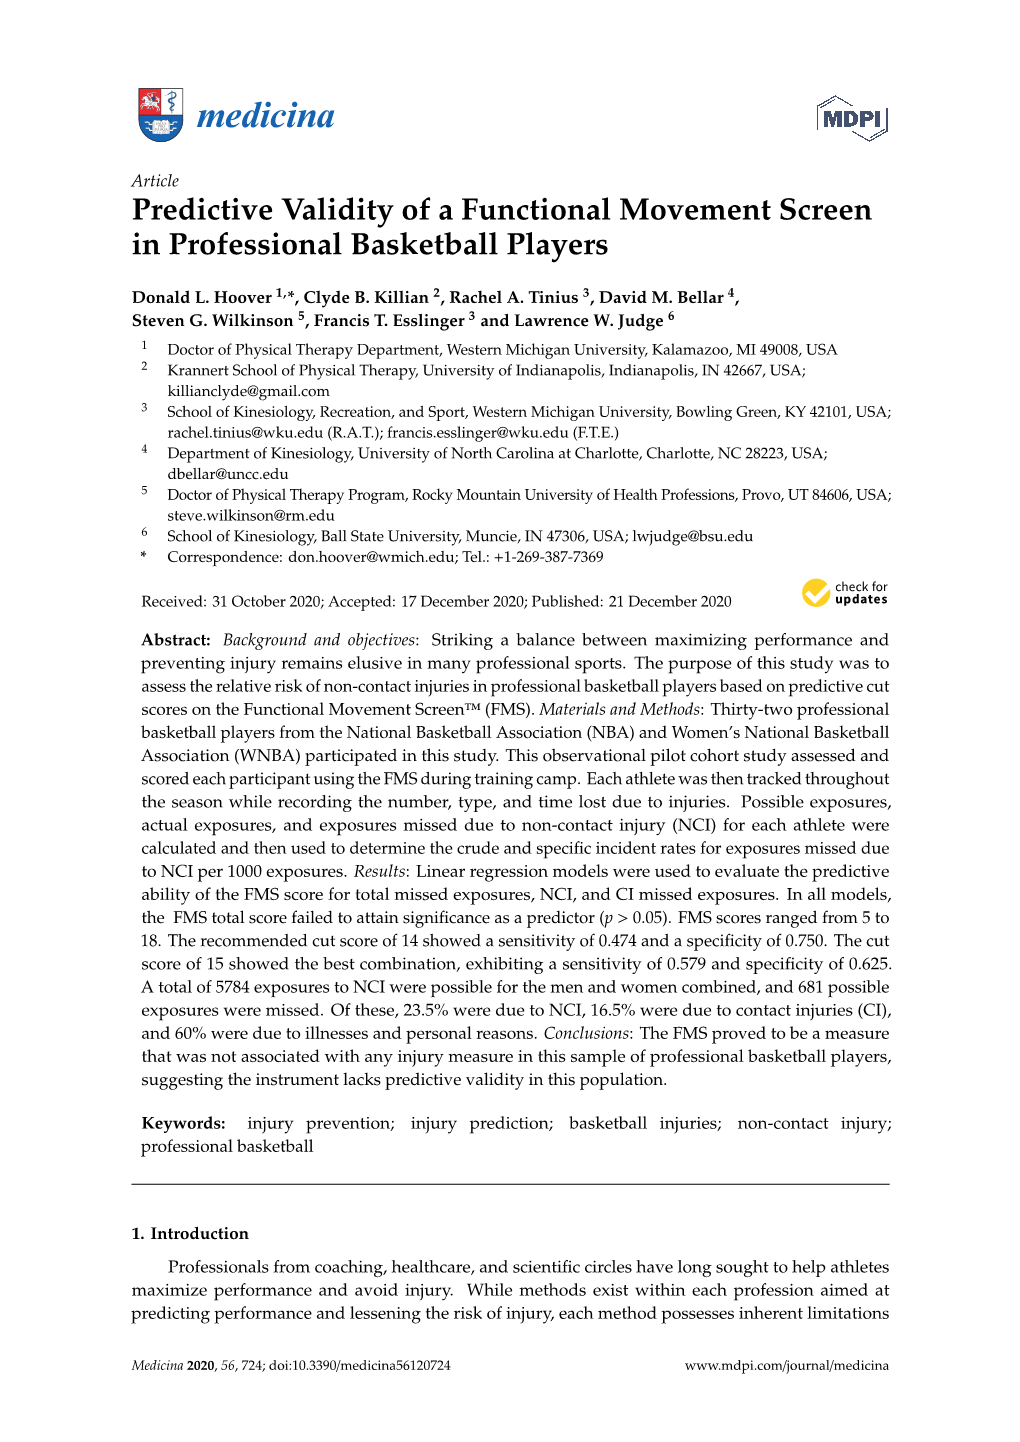 Predictive Validity of a Functional Movement Screen in Professional Basketball Players